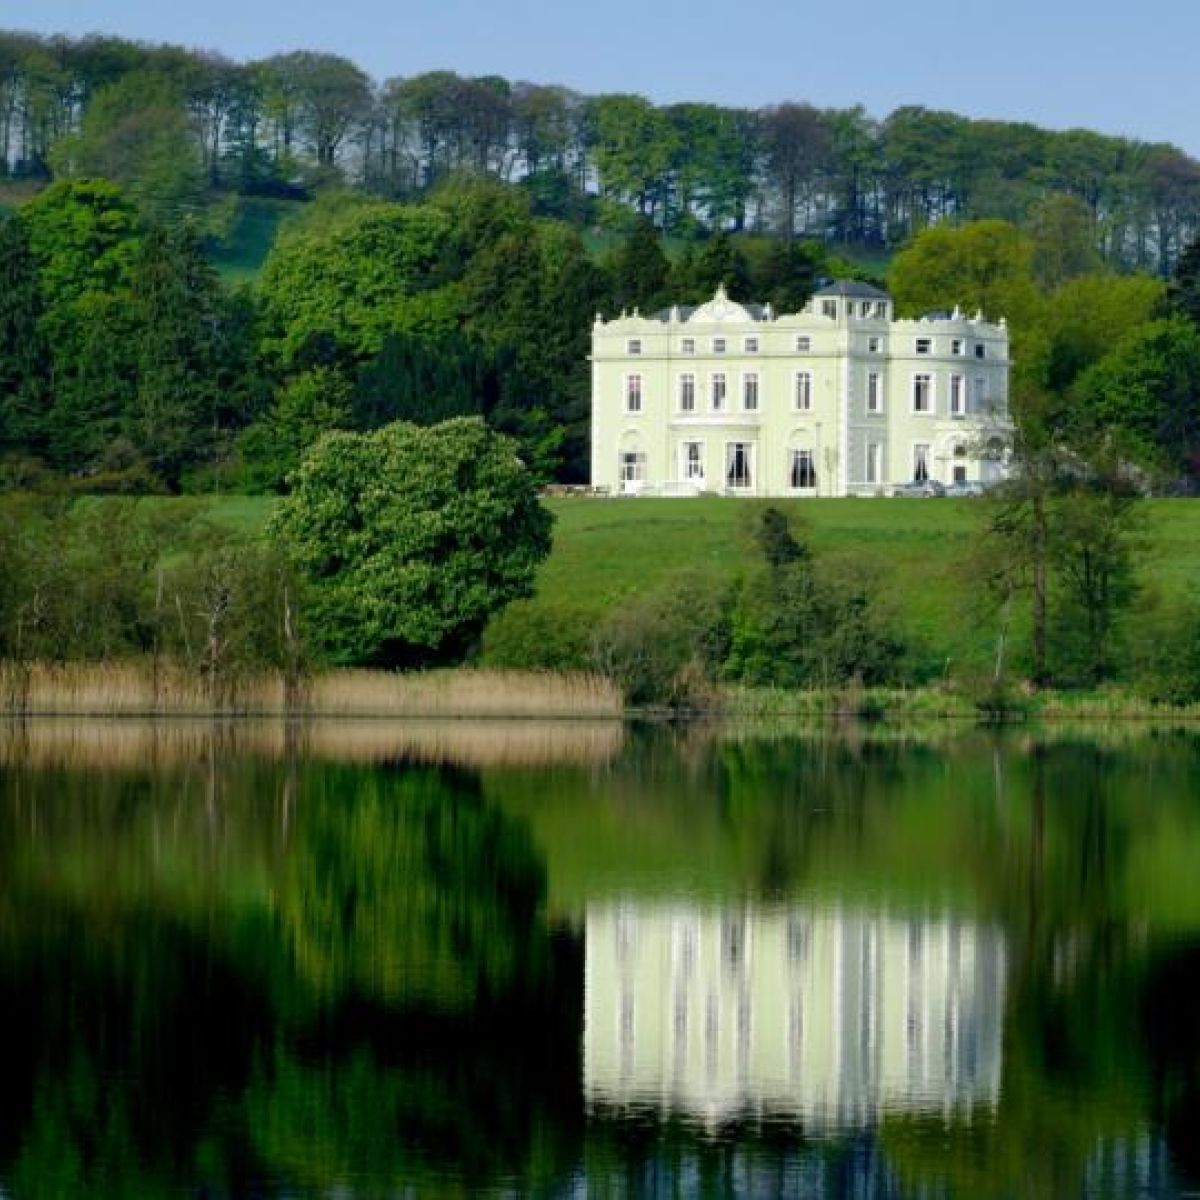 Hillgrove Hotel: 4-Star Hotel in Monaghan | Accommodation in 